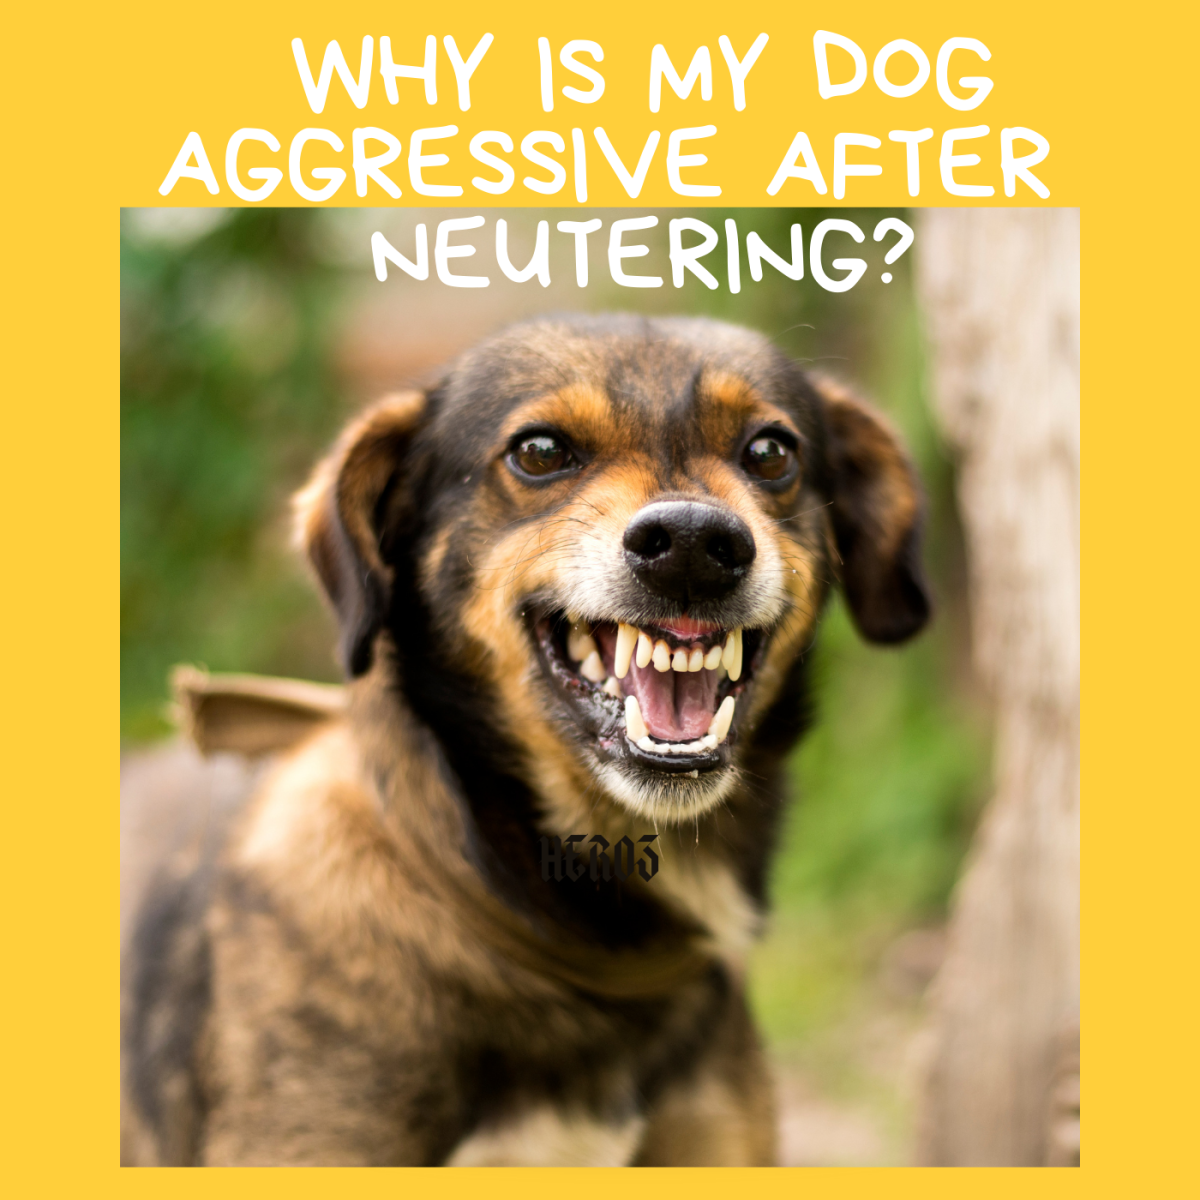 Is your dog aggressive after neutering?